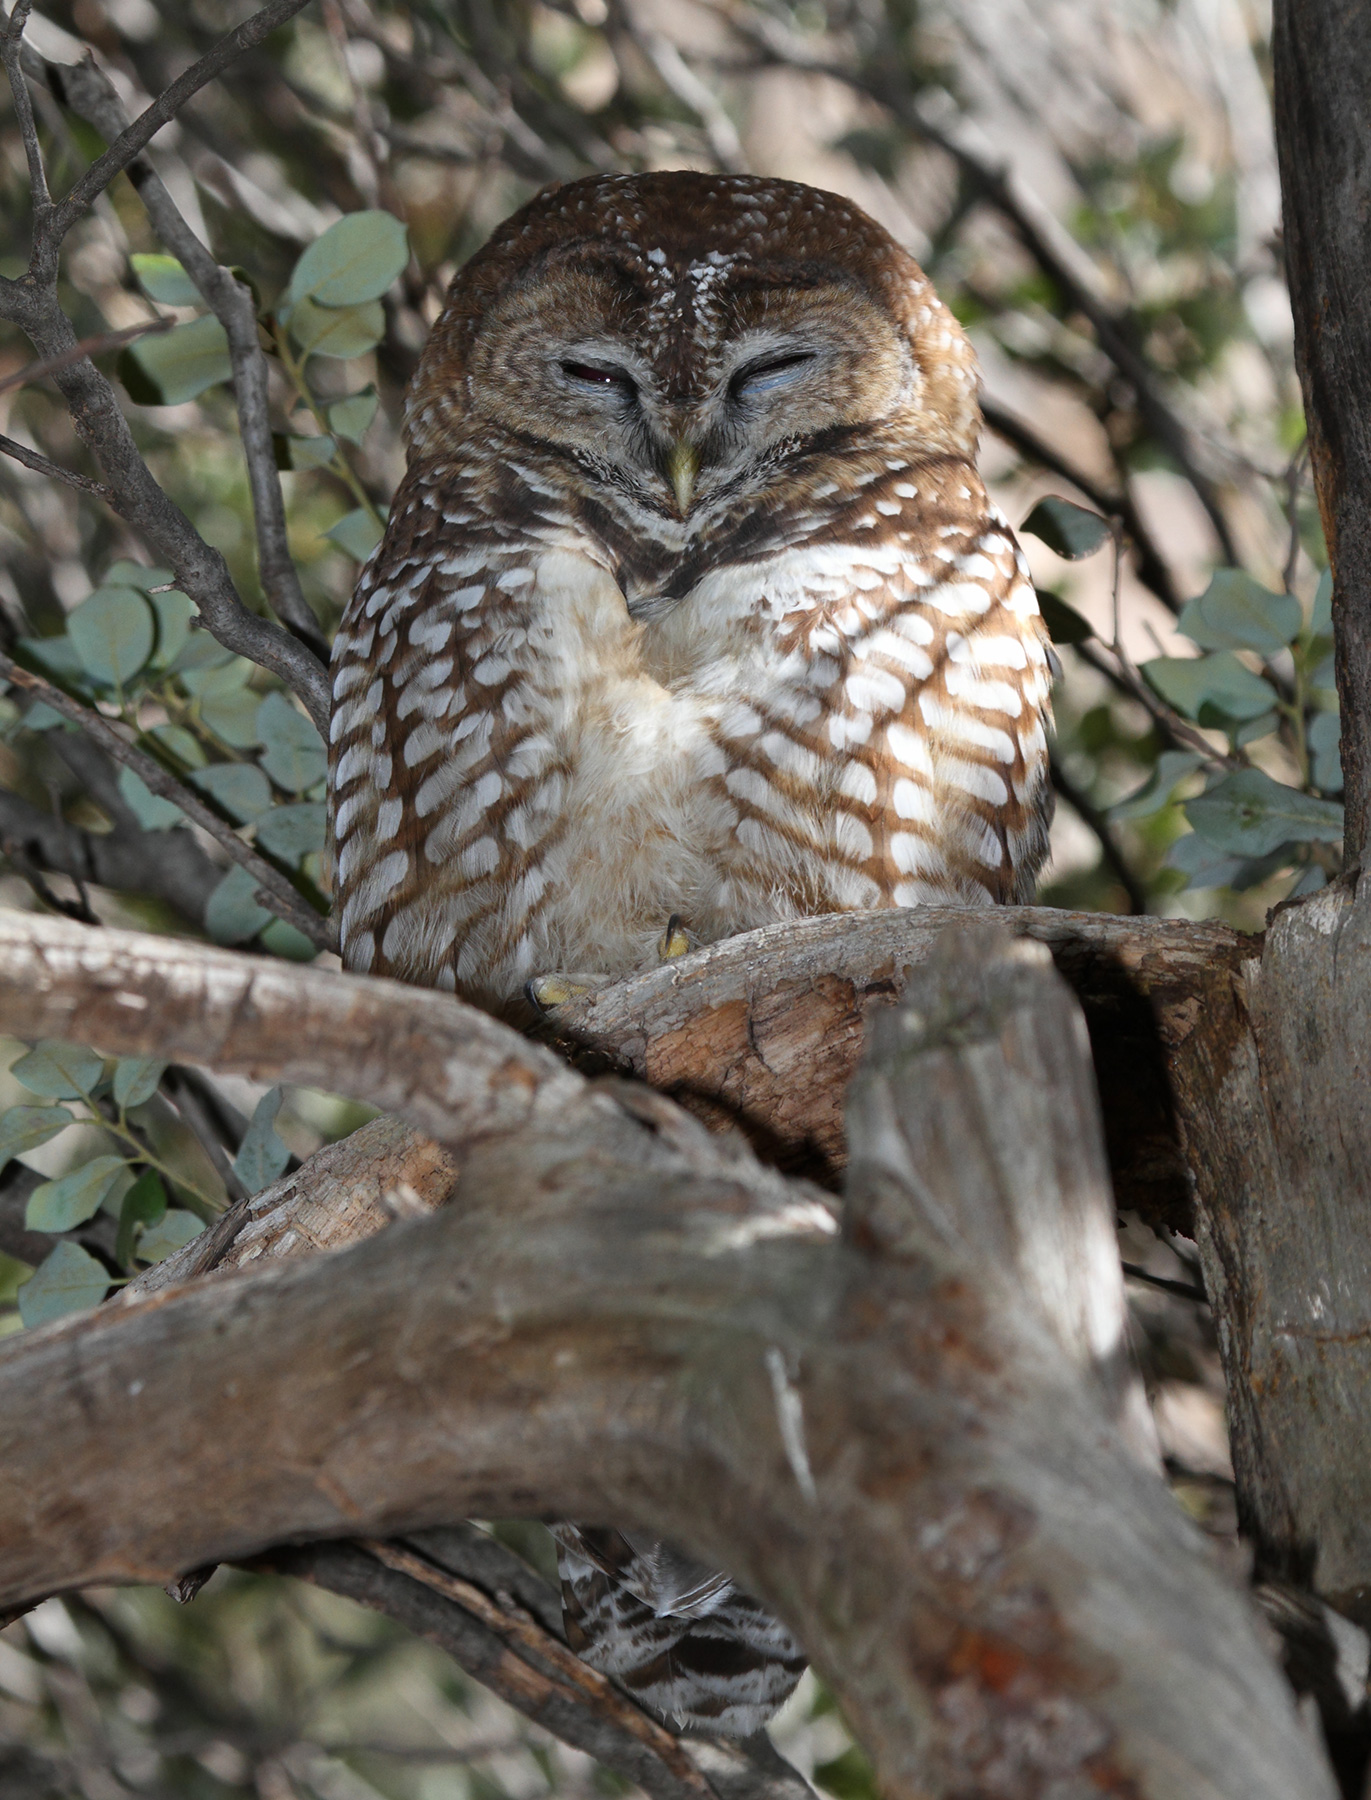 File:Mexican Spotted Owl.jpg - Wikimedia Commons